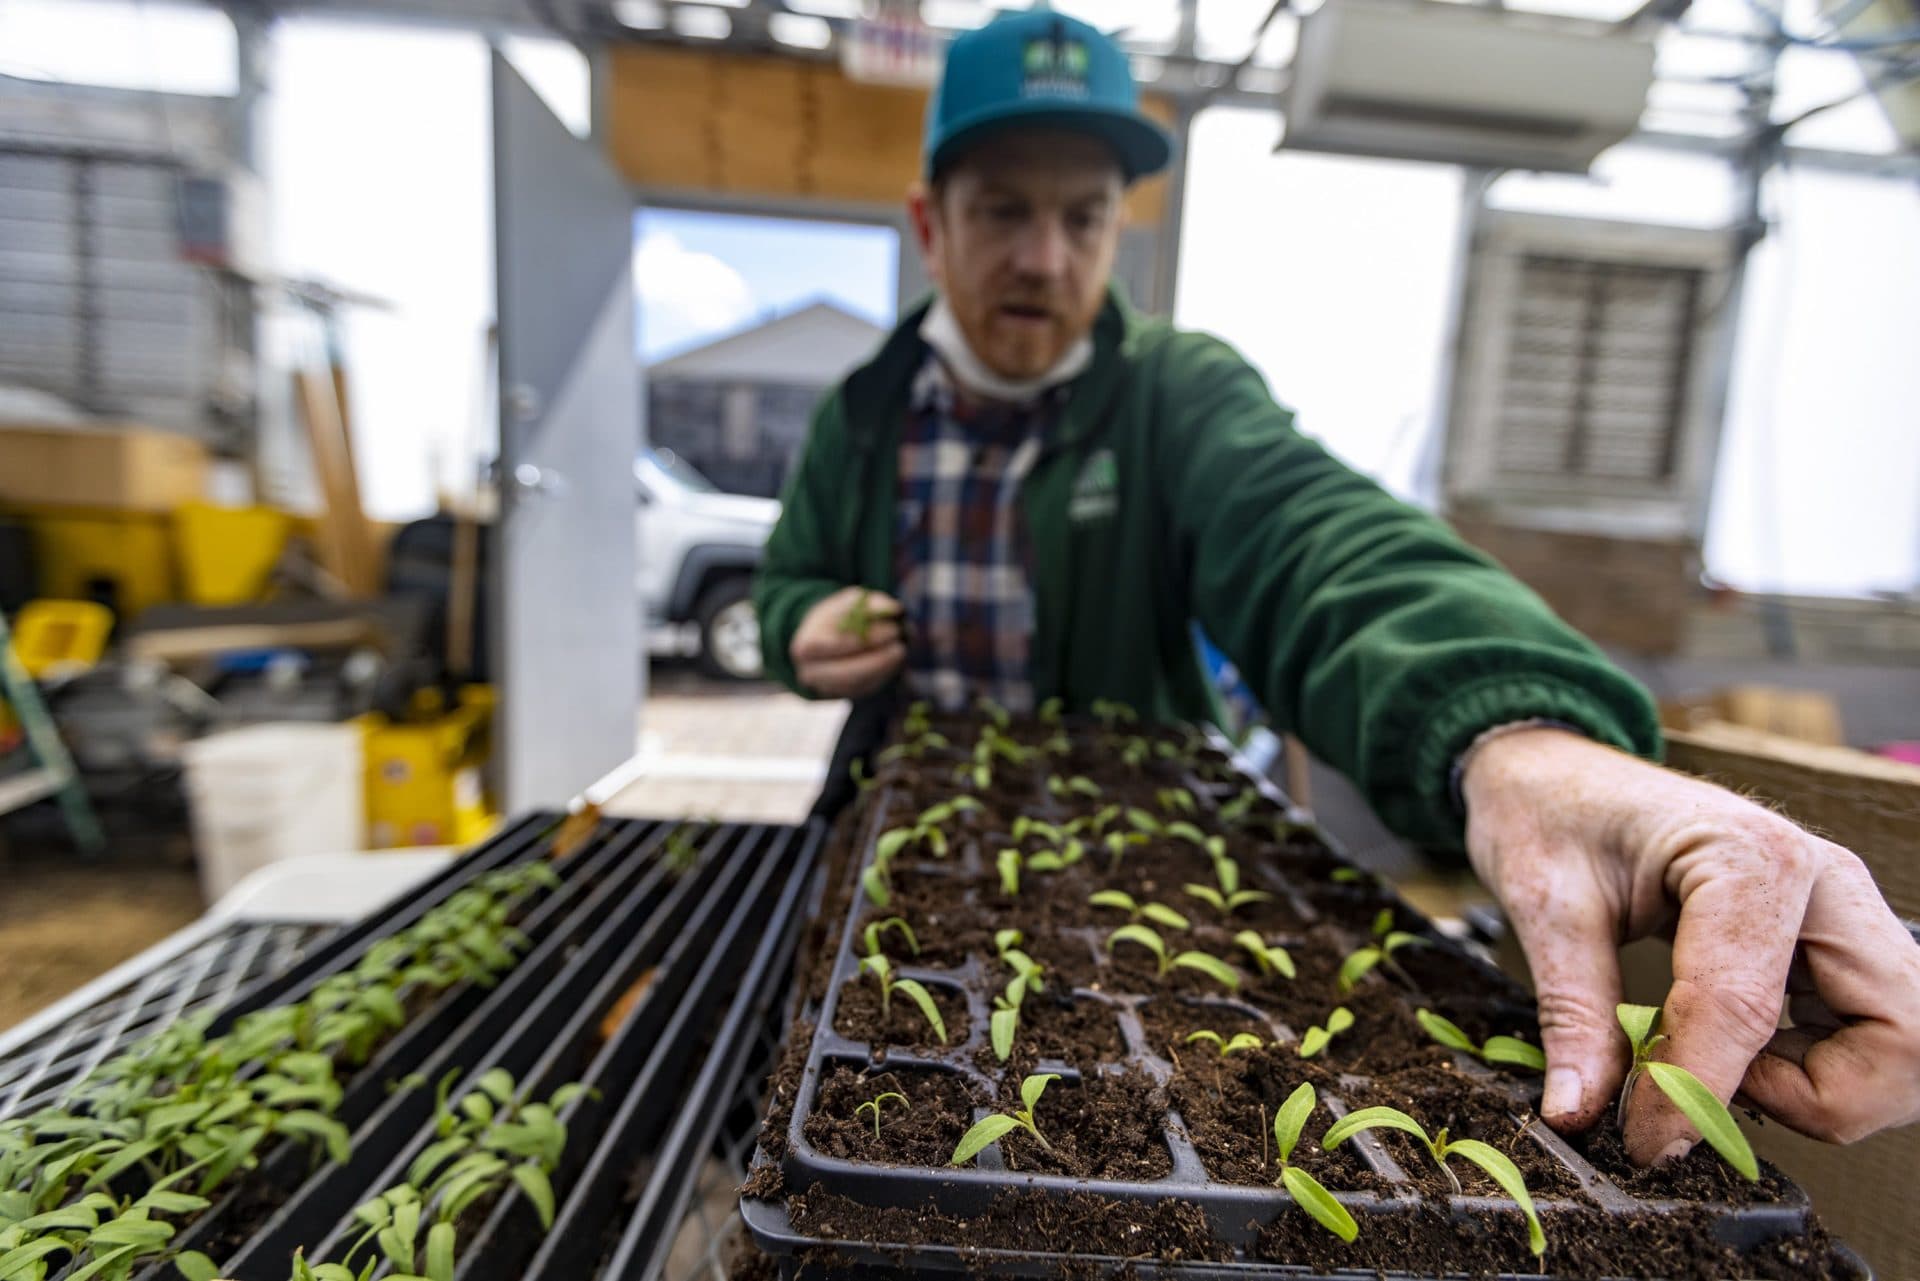 Tristram Keefe transfers Cherokee tomato seedlings from germination flats into planting trays at Fowler Clark Epstein Farm in Mattapan. (Jesse Costa/WBUR)